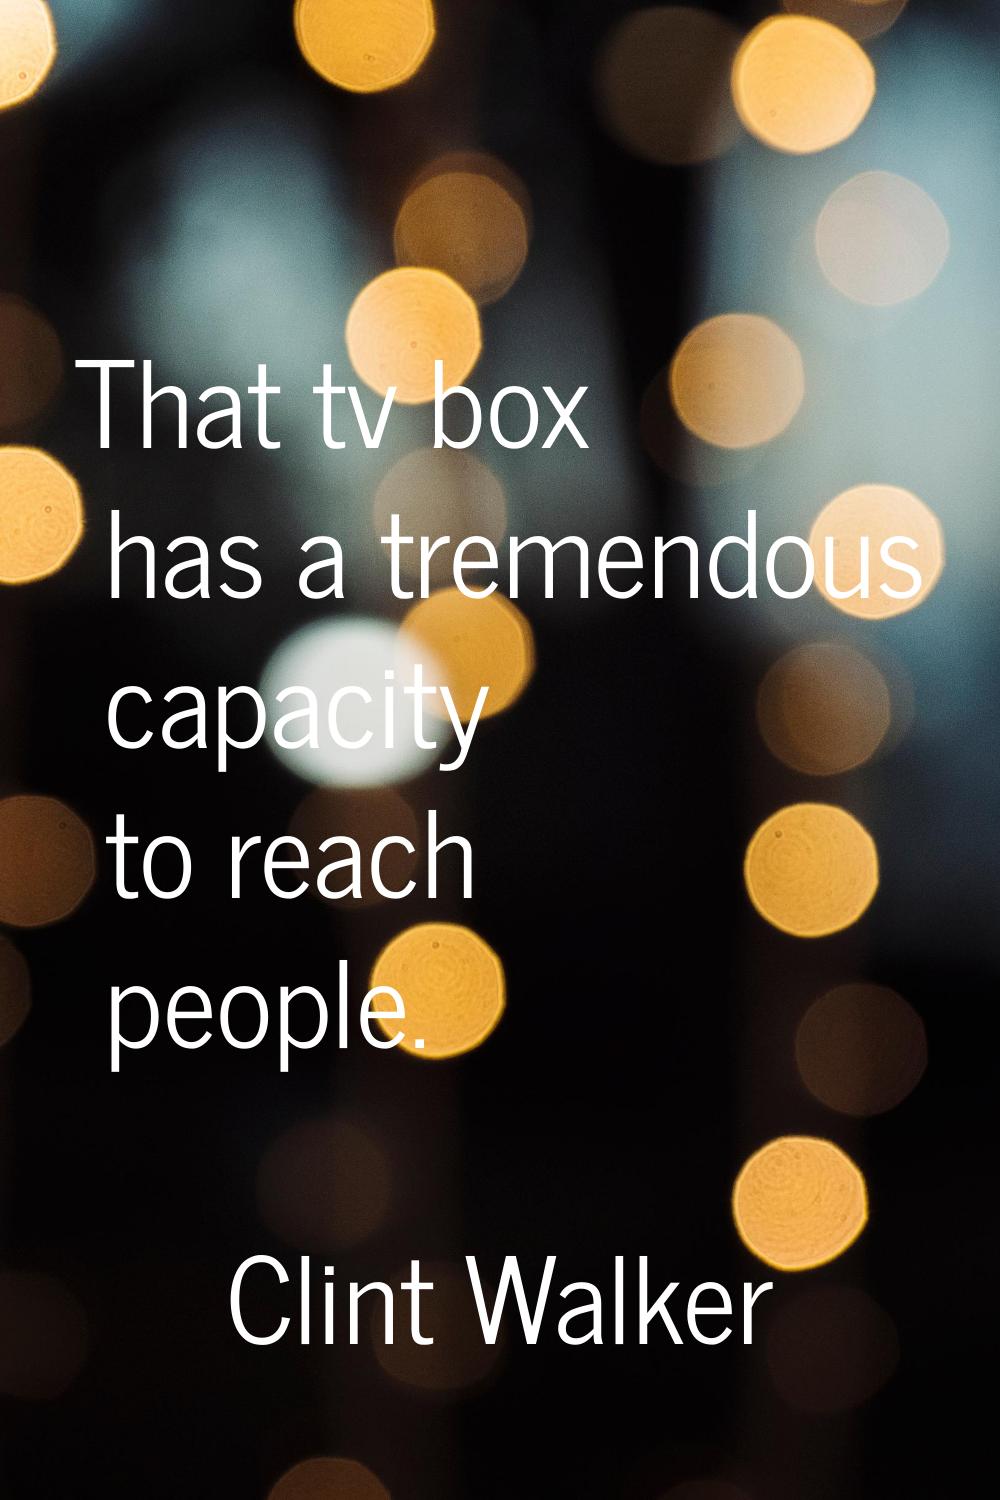 That tv box has a tremendous capacity to reach people.